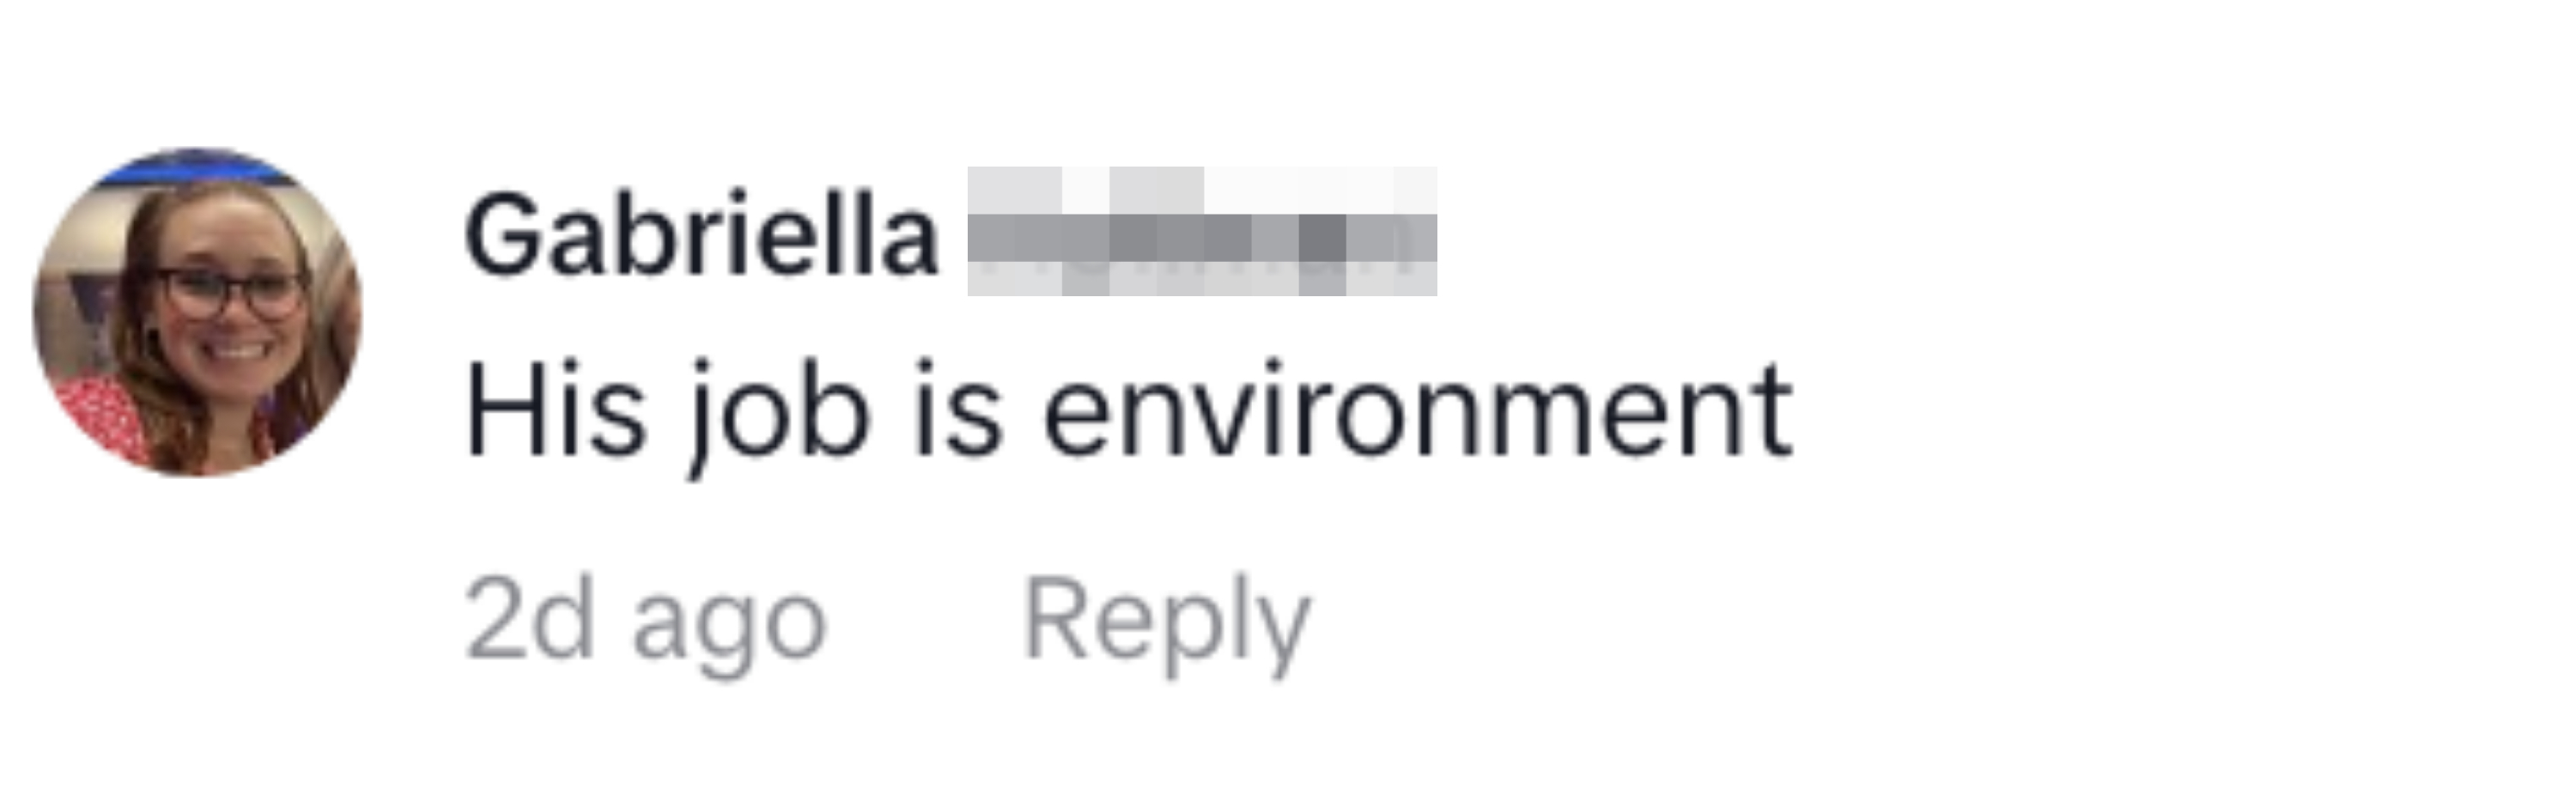 Commenter says his job is environment